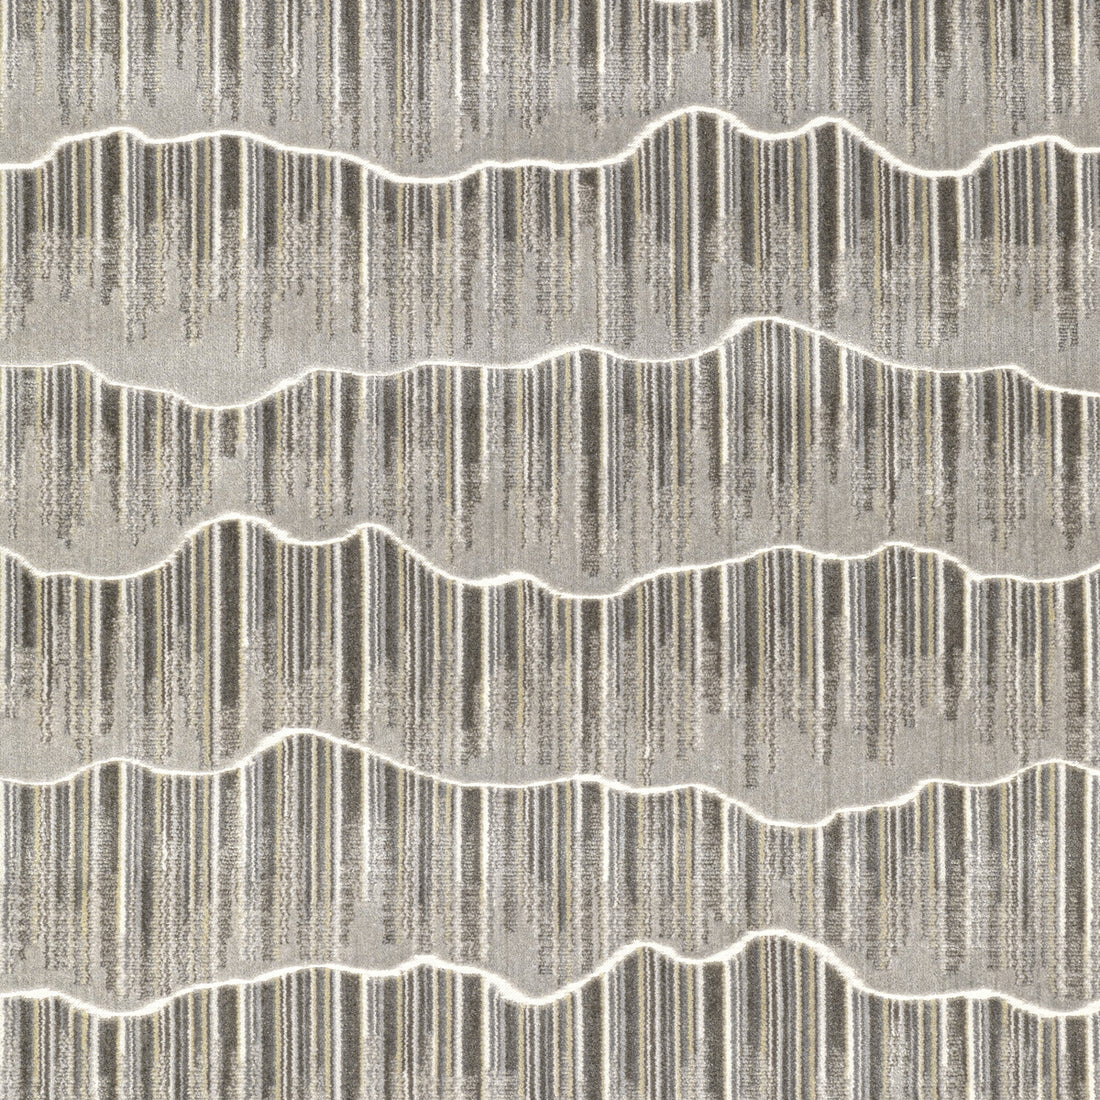 Mountainscape fabric in camel color - pattern 36350.16.0 - by Kravet Couture in the Modern Luxe III collection